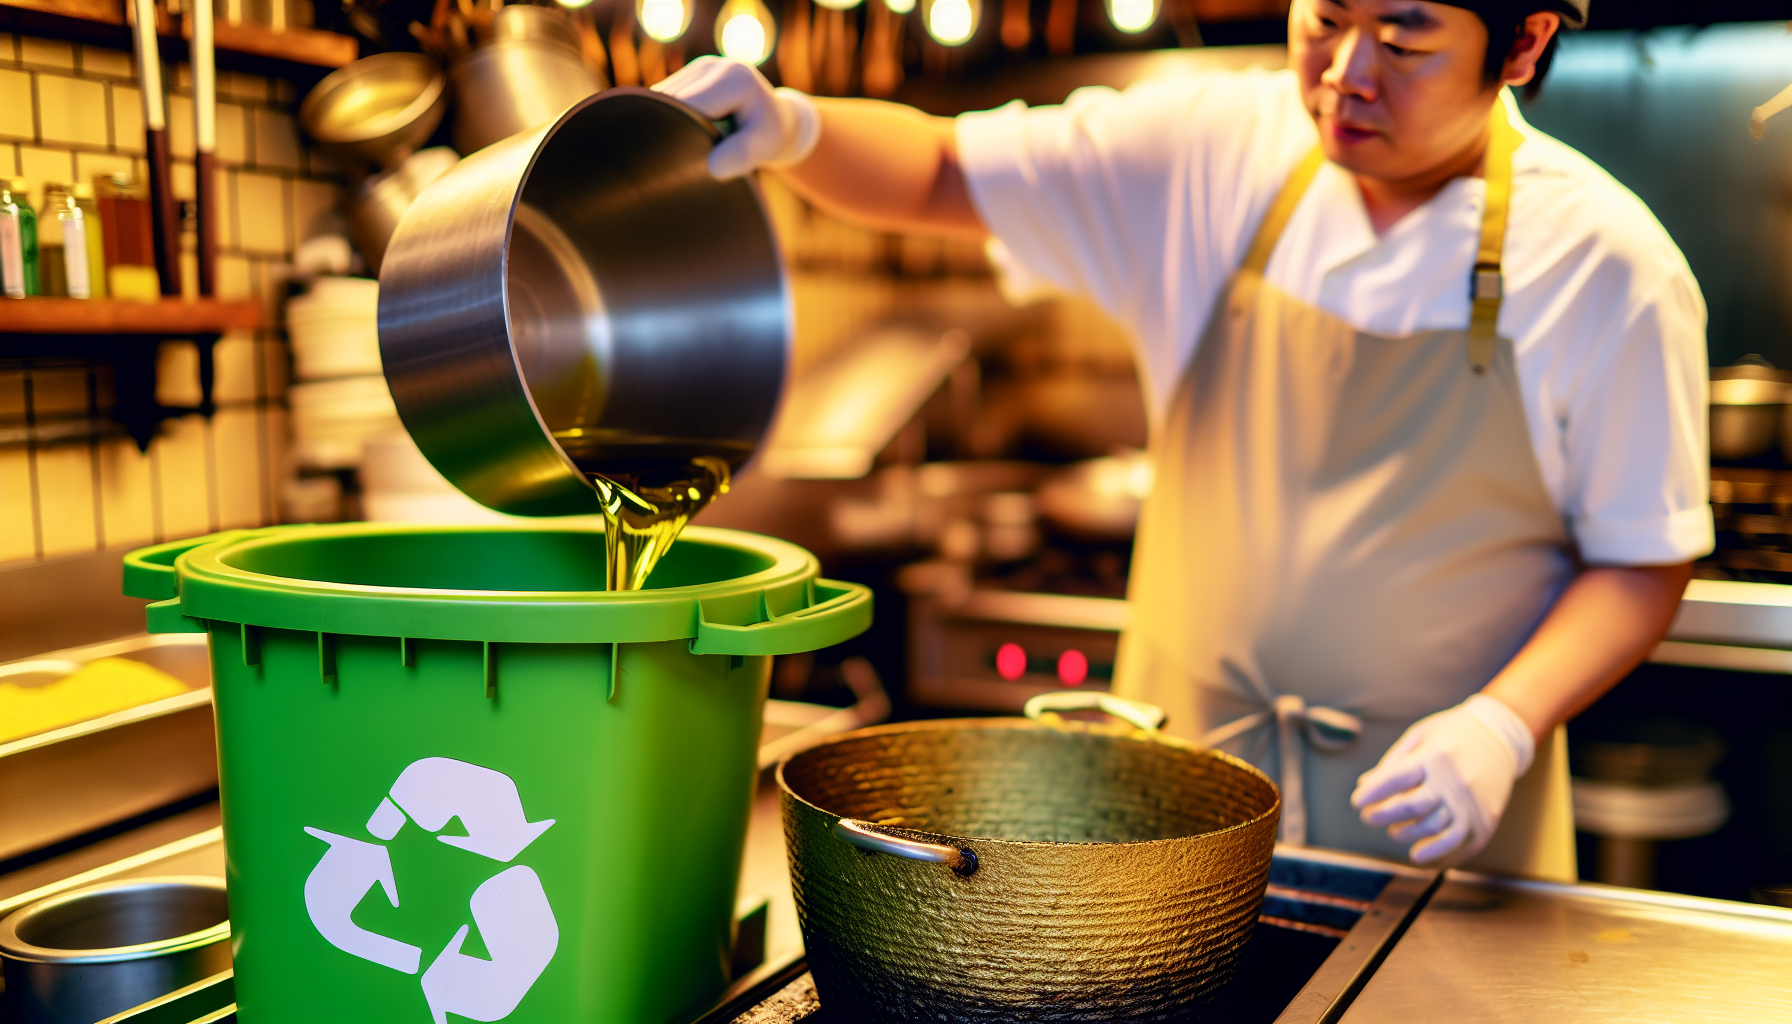 A restaurant owner pouring used cooking oil into a grease collection bin